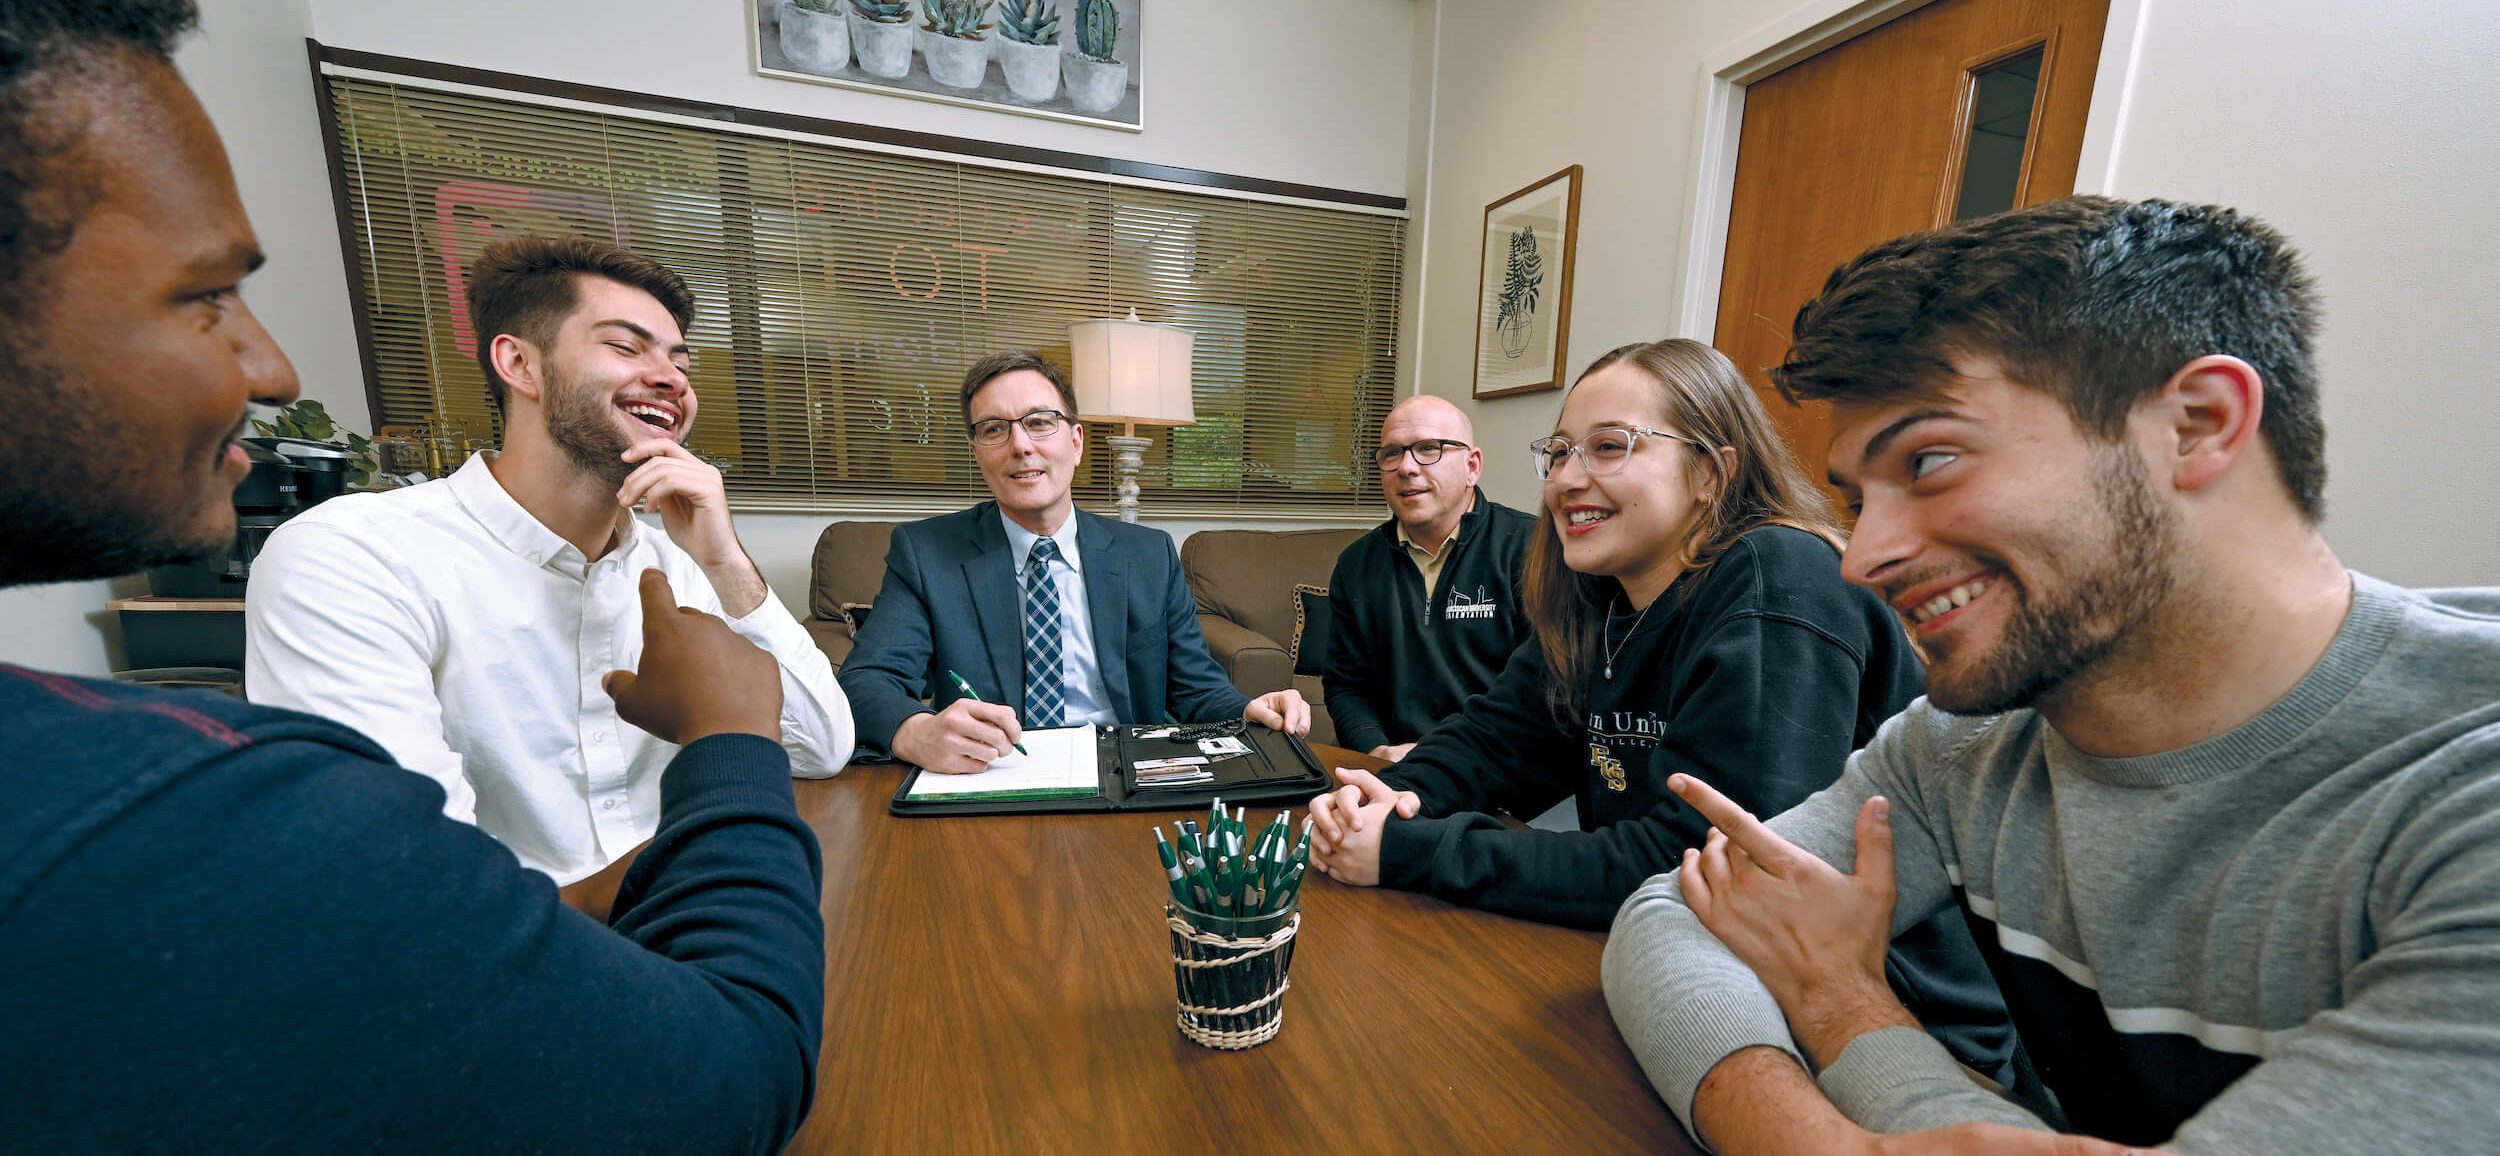 David Schmiesing ’92 MSE ’00, dean for Personal Vocation, and Dr. Dan Dentino ’97, vice president of Student Life, with outgoing and incoming student government officers Jared Johnson, Gabe Denley, Celine Najm, and Caleb Rider.